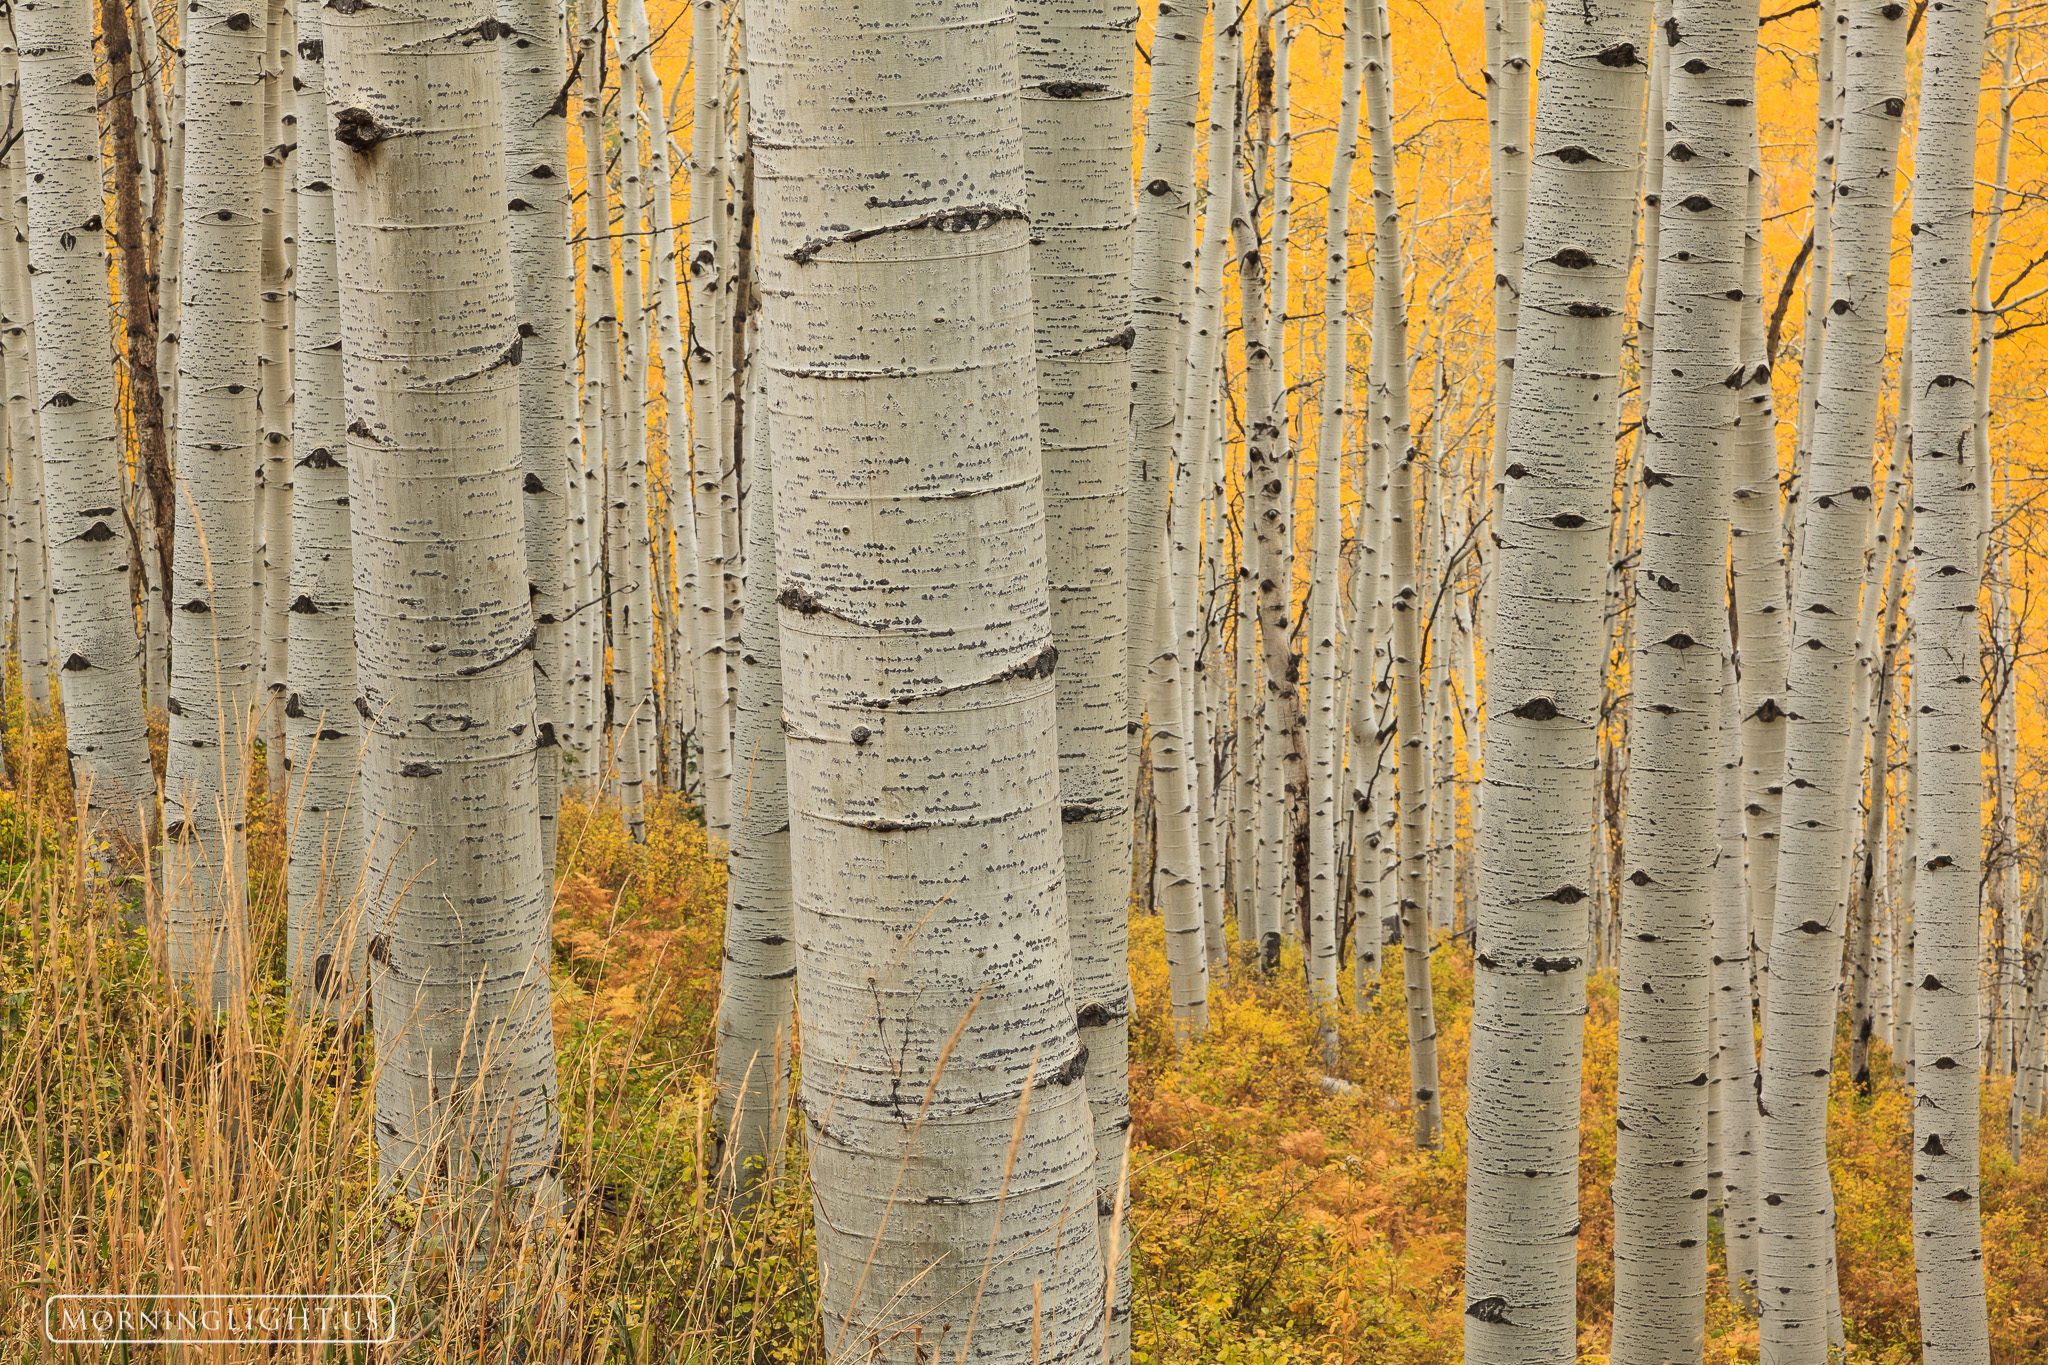 This beautiful aspen stand near Kebler Pass, Colorado was one of the most beautiful I saw. What really intrigued me were the...